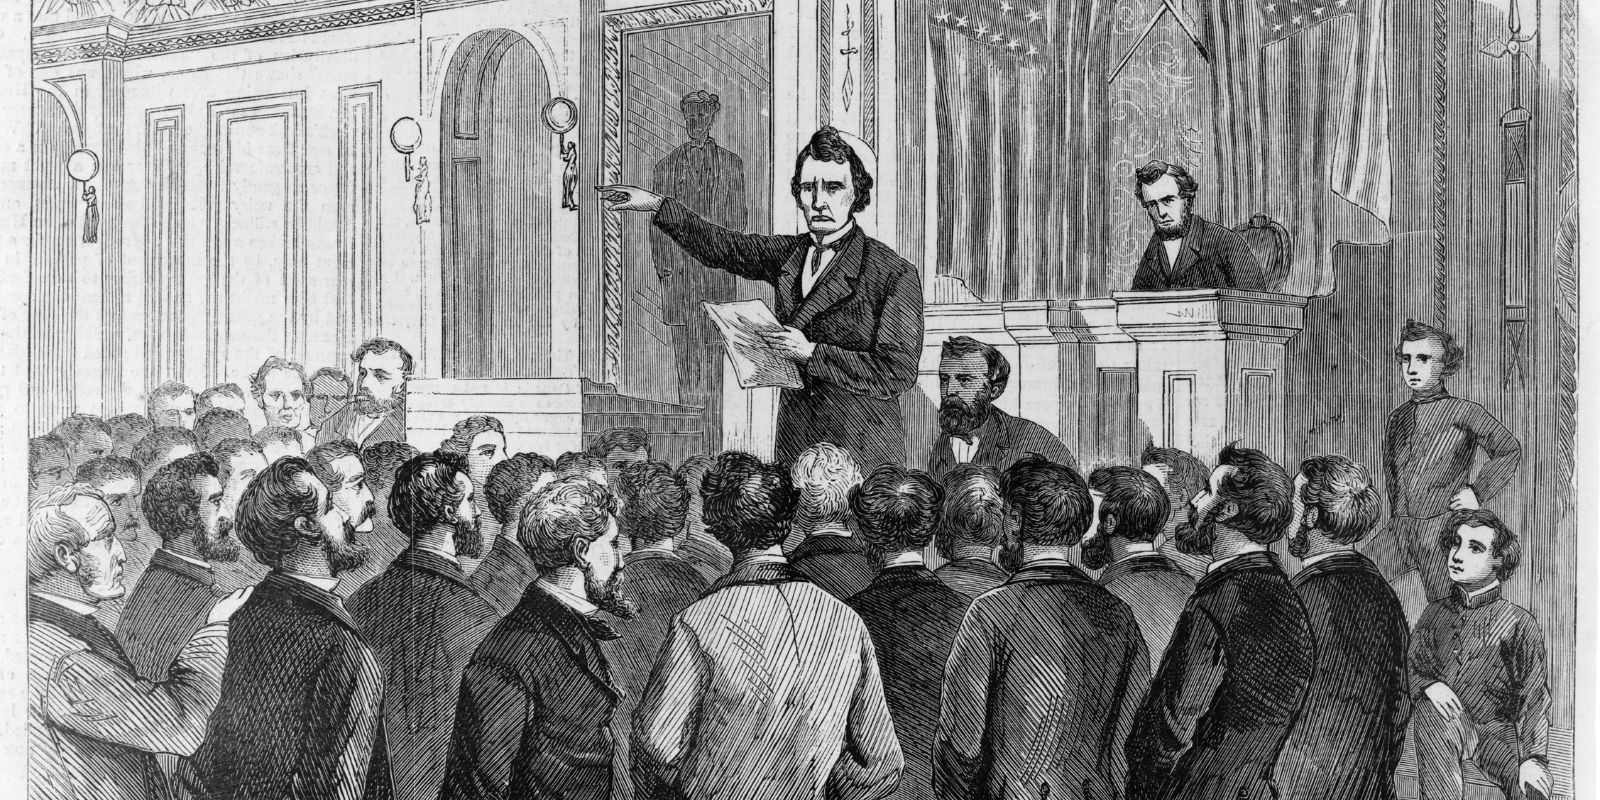 February 24th: 17th President, Andrew Johnson Impeached